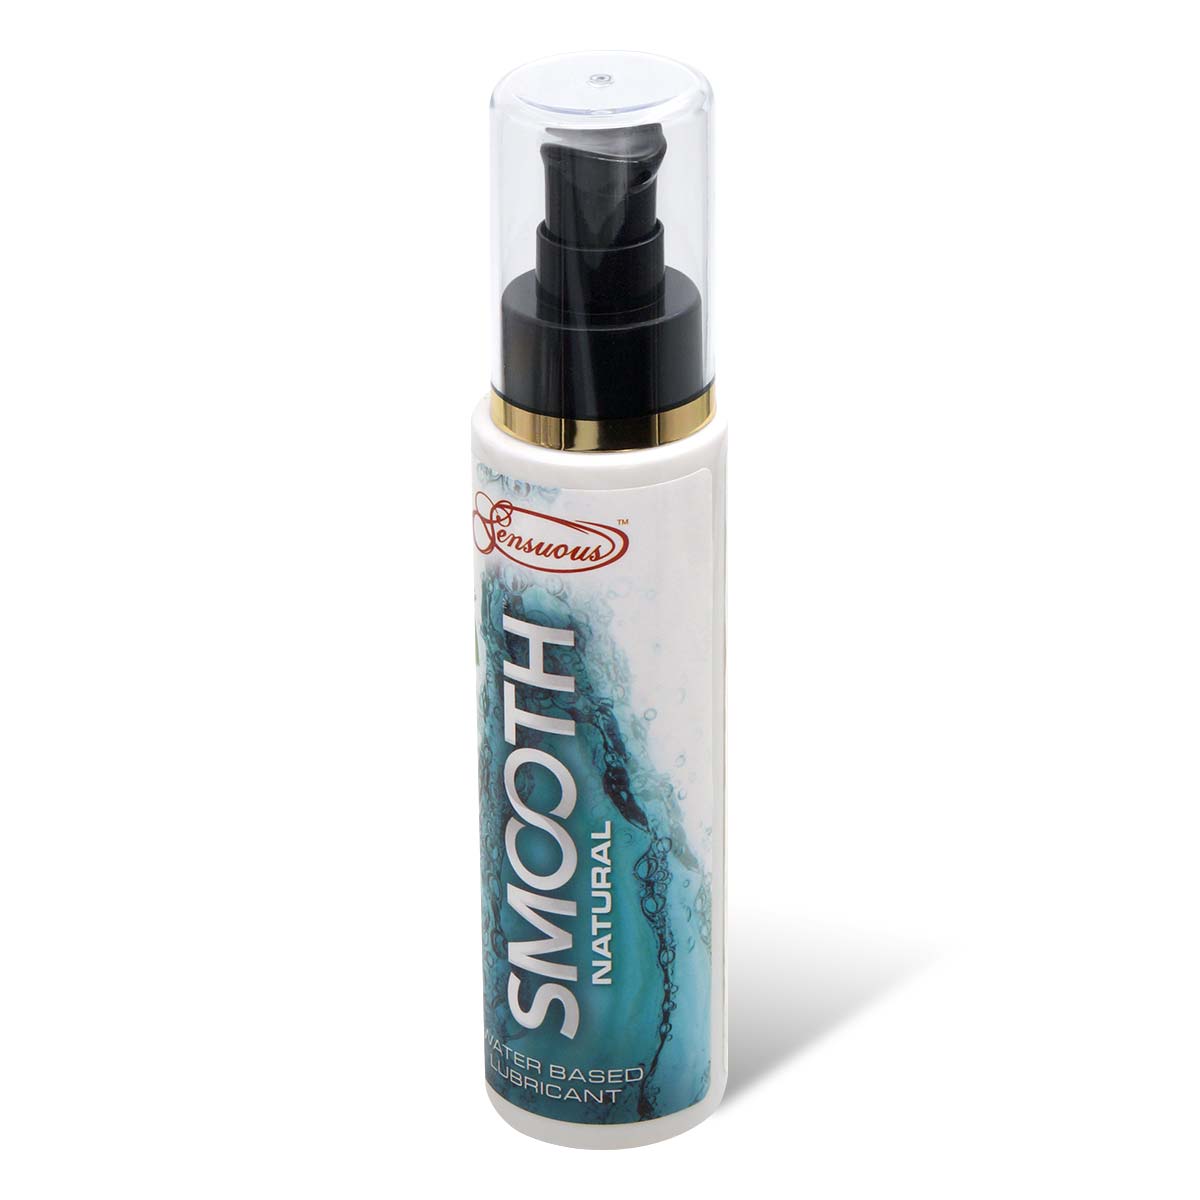 Sensuous Smooth Natural 100ml 水性润滑液-p_1